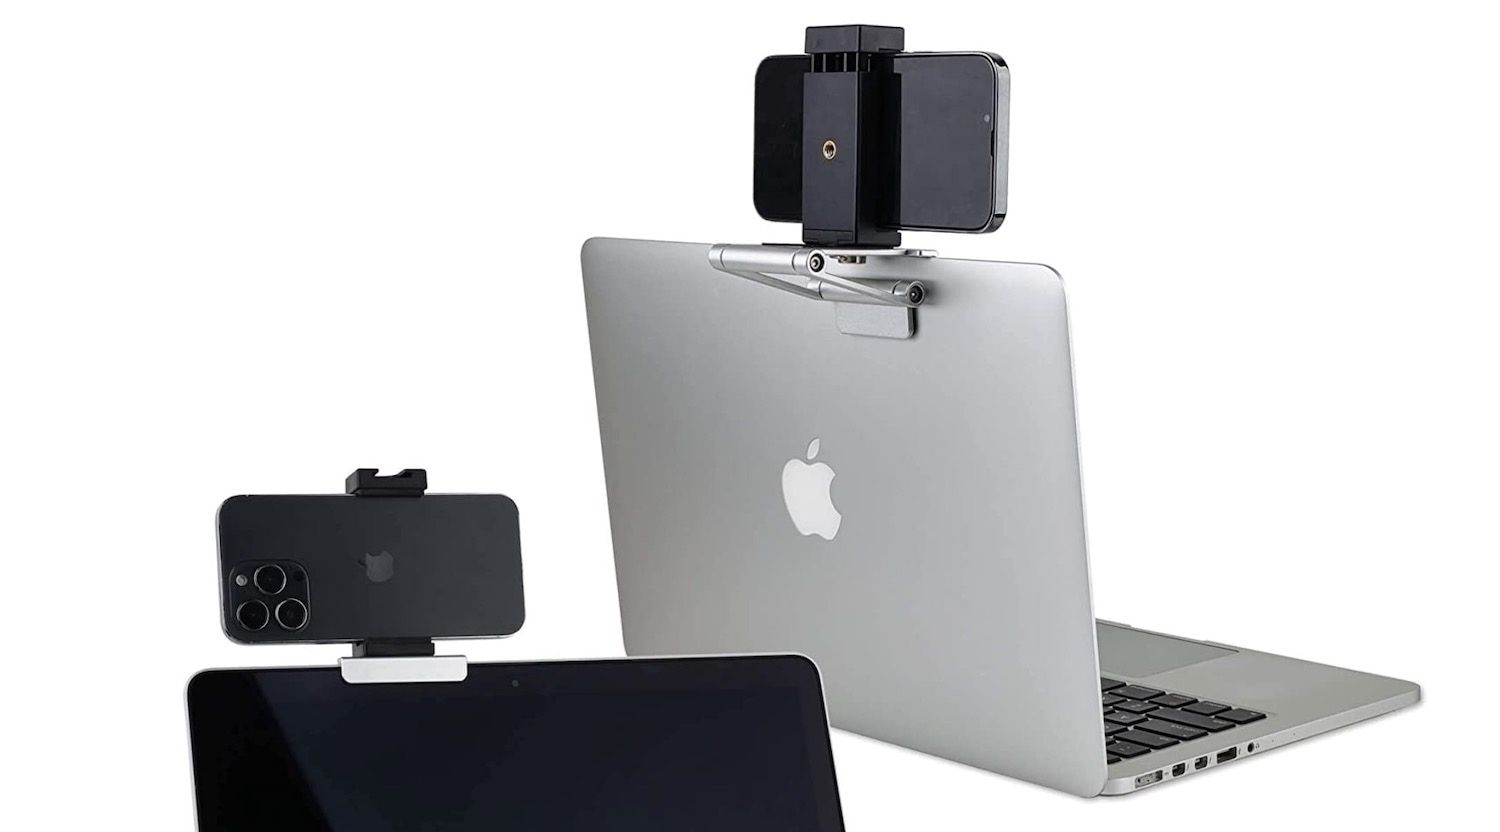 POWRIG continuity camera mount for Mac and iPhone